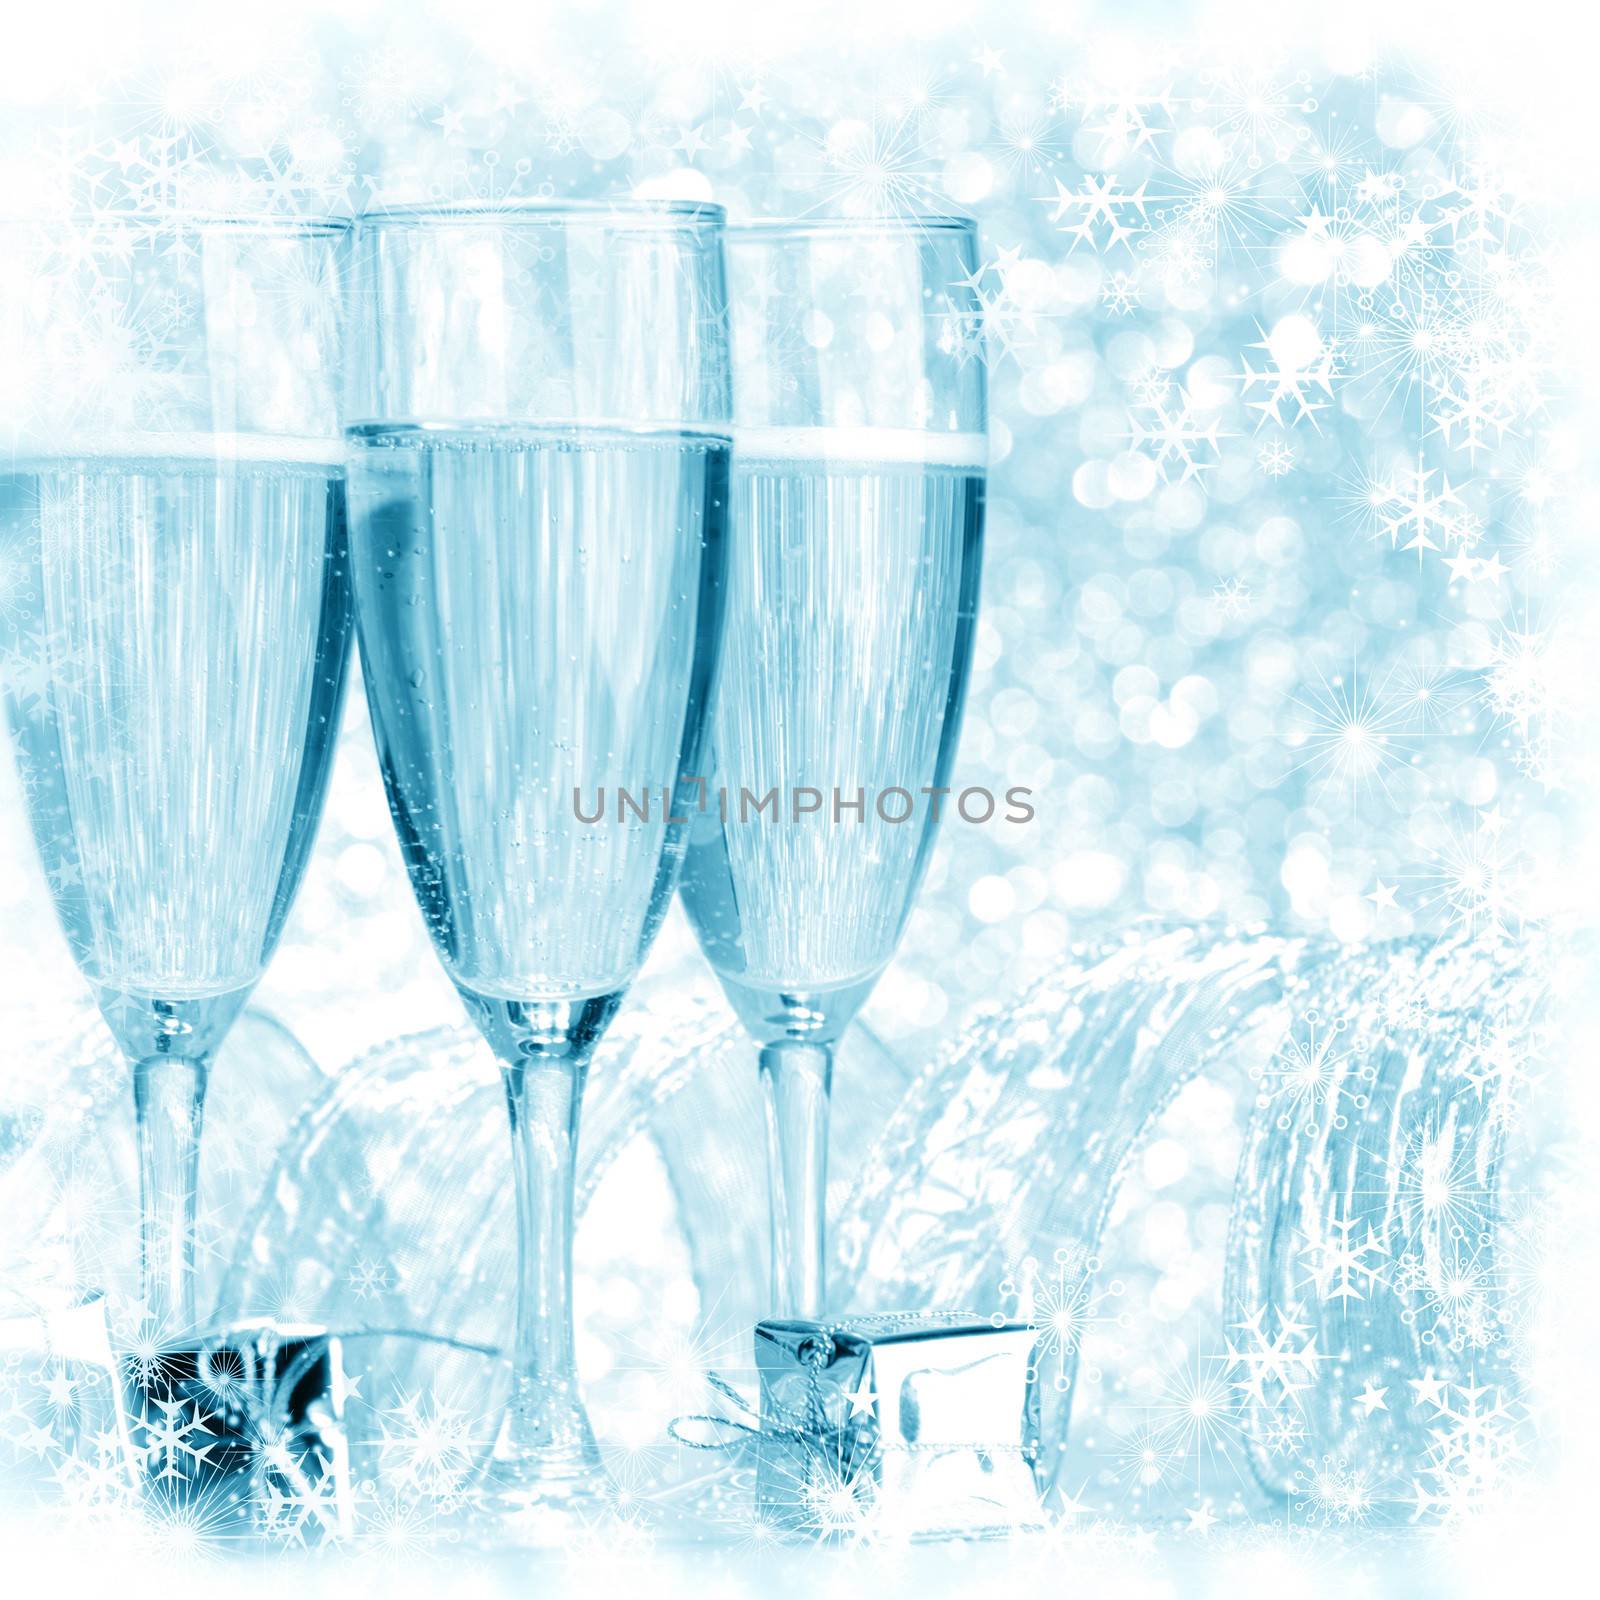 New year champagne and gifts with snowflakes and stars